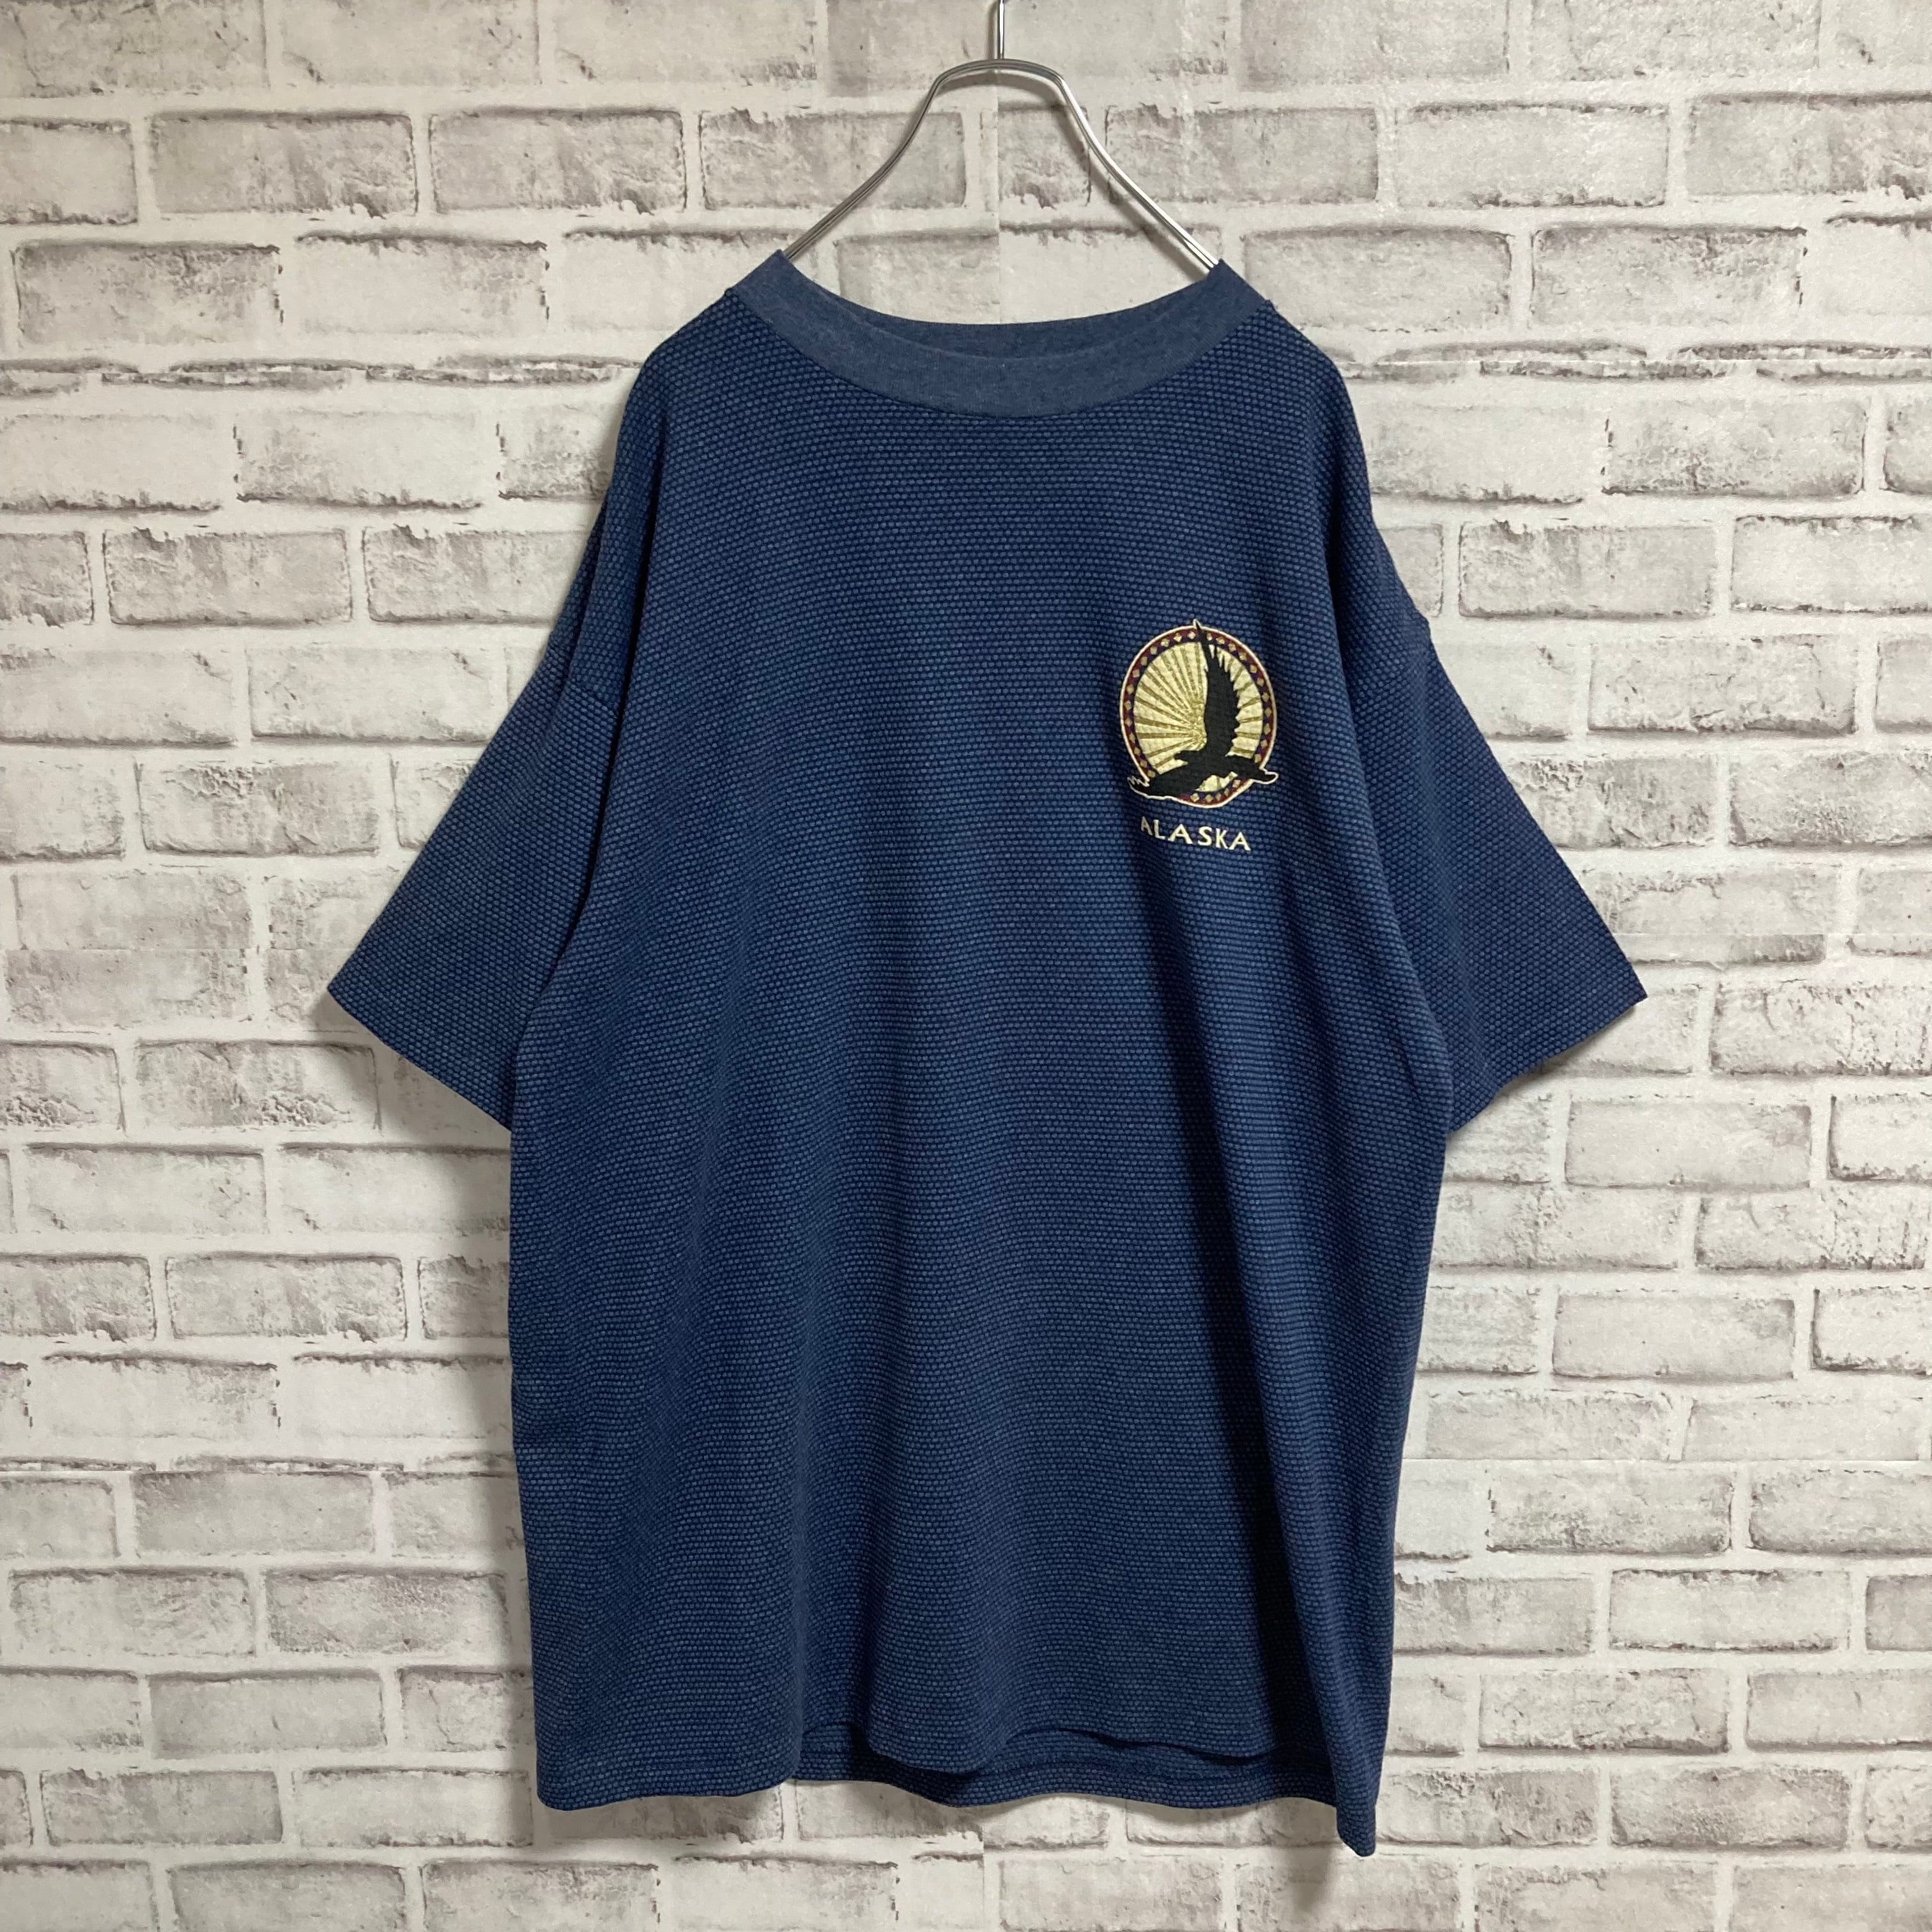 【H.L.MILLER GOLD】S/S Waffle Tee XL Made in USA 90s vintage “ALASKA” ビンテージ  Tシャツ ワッフル生地 シングルステッチ アメリカ USA 古着